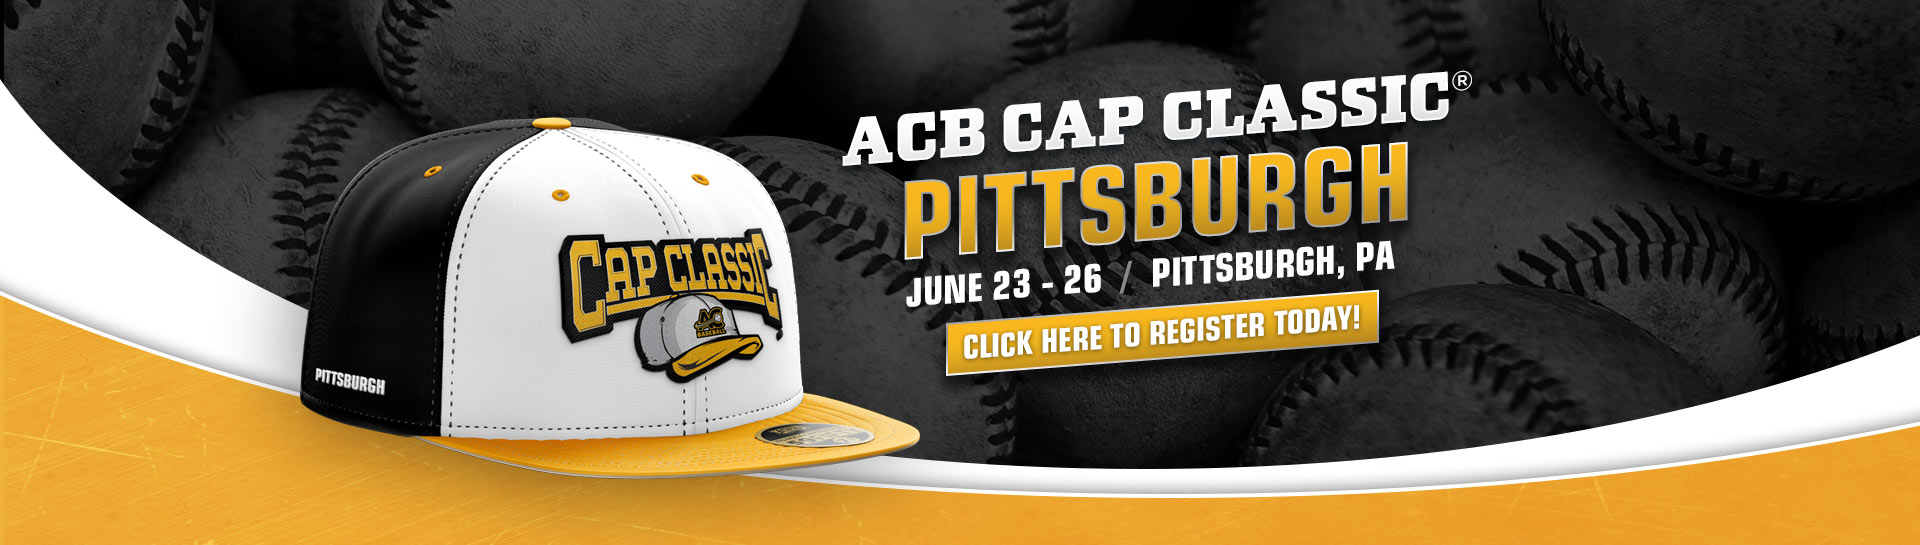 The Cap Classic® Series Presented by AC Baseball